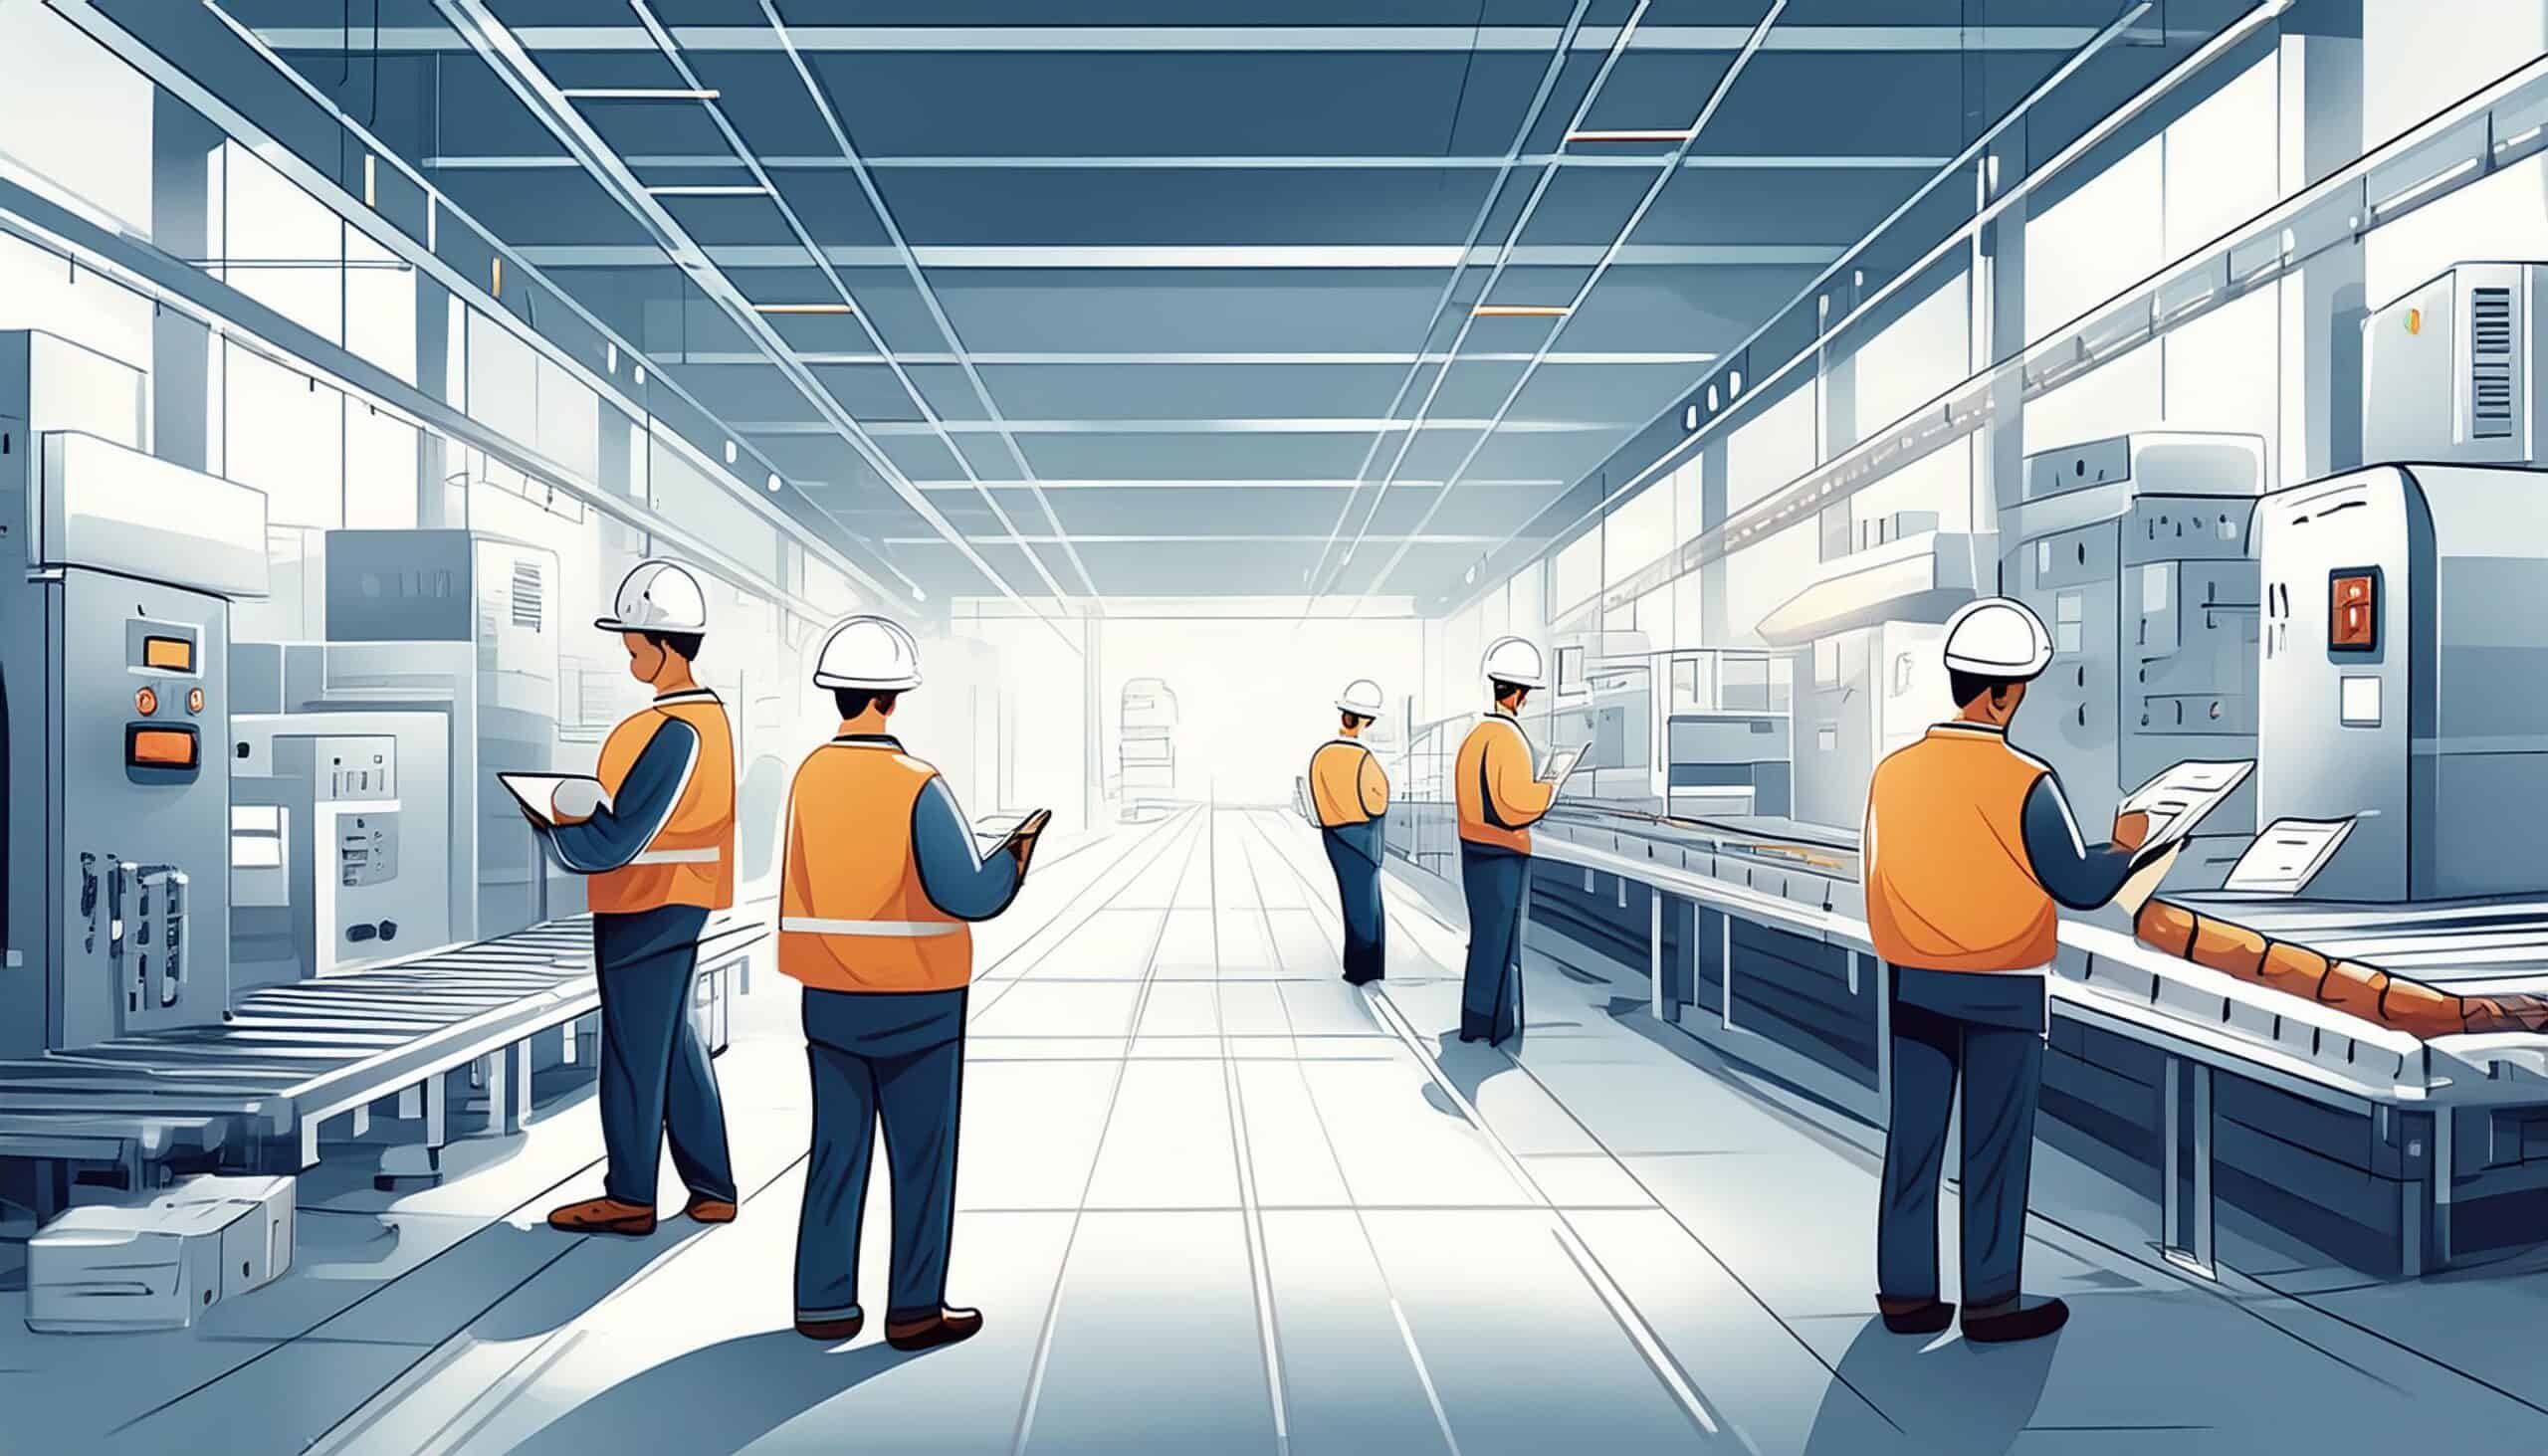 An illustration showing a well-organized manufacturing floor with minimal clutter. Workers are seen efficiently managing inventory and processes. Include visual elements like flowcharts and diagrams on walls, a worker implementing a 5S principle (sort, set in order, shine, standardize, sustain), and another worker making notes for continuous improvement. The scene should emphasize efficiency, waste reduction, and streamlined processes.